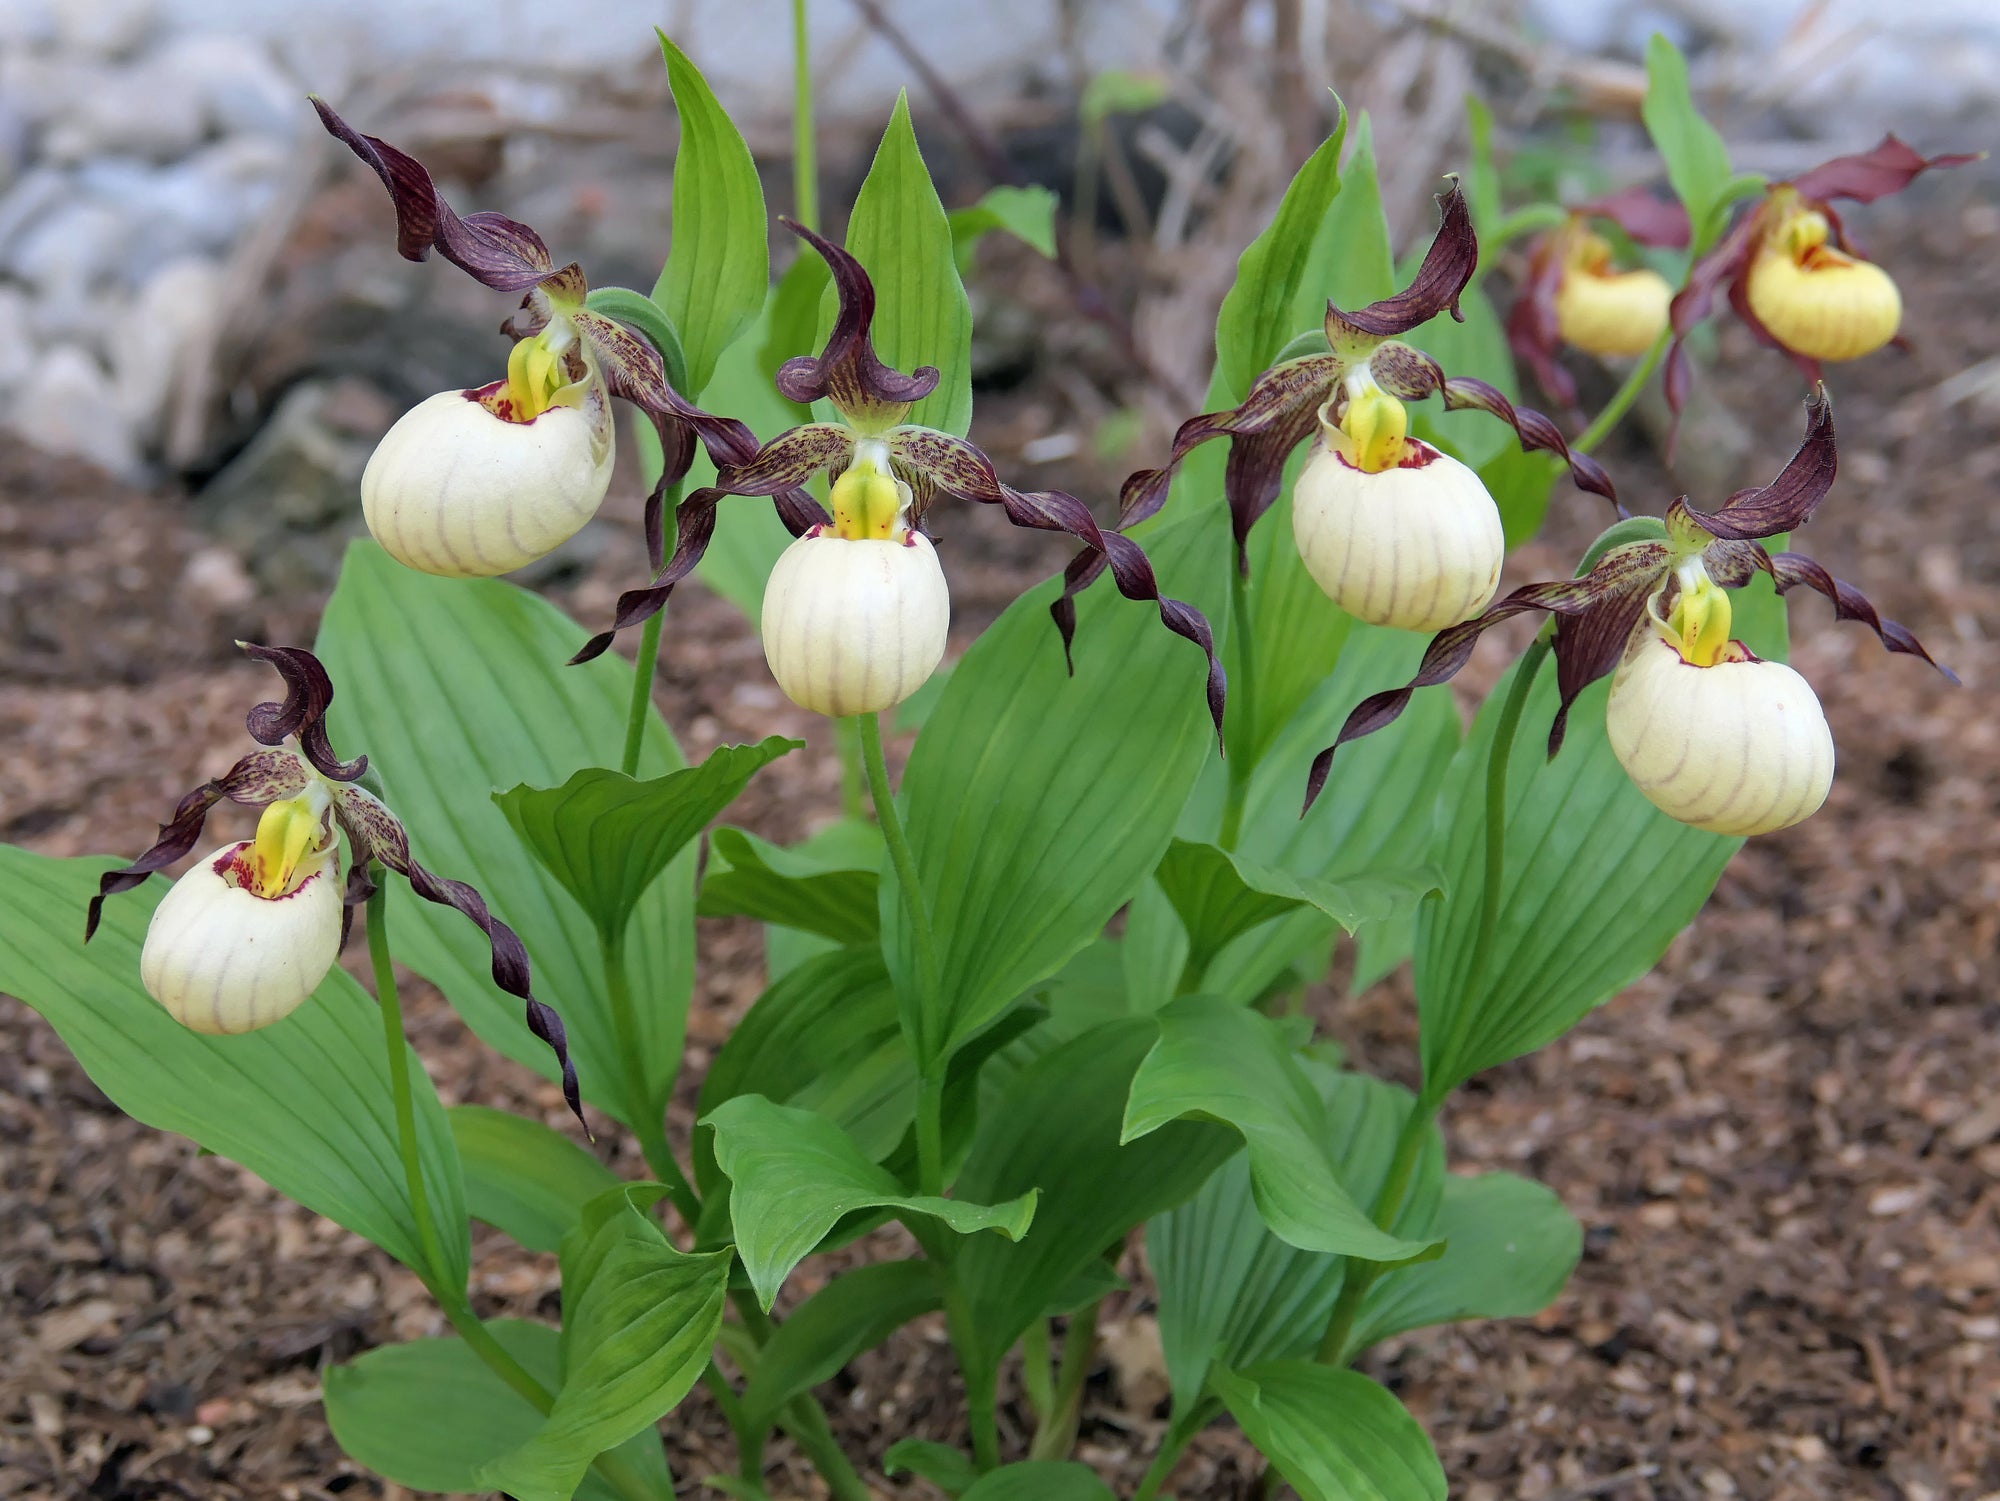 Cypripedium 'Frosch's Mother Earth'  (Lady's Slipper Orchid)